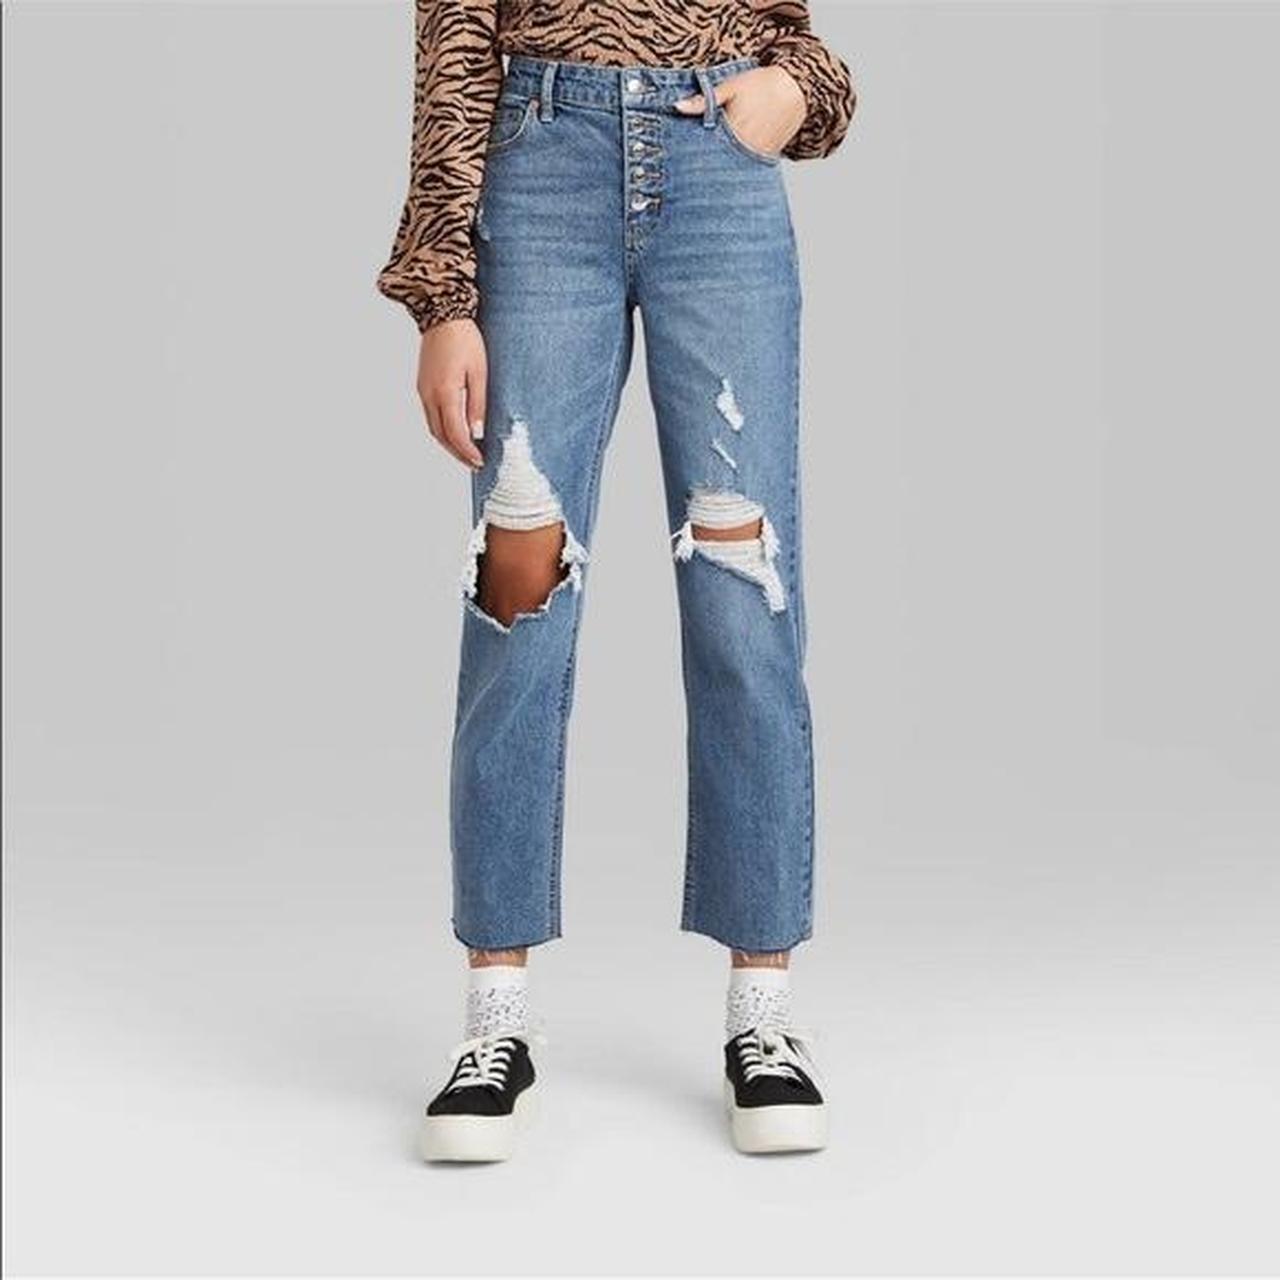 Wild Fable Jeans High Rise Mom Jean Distressed Ripped Womens Blue